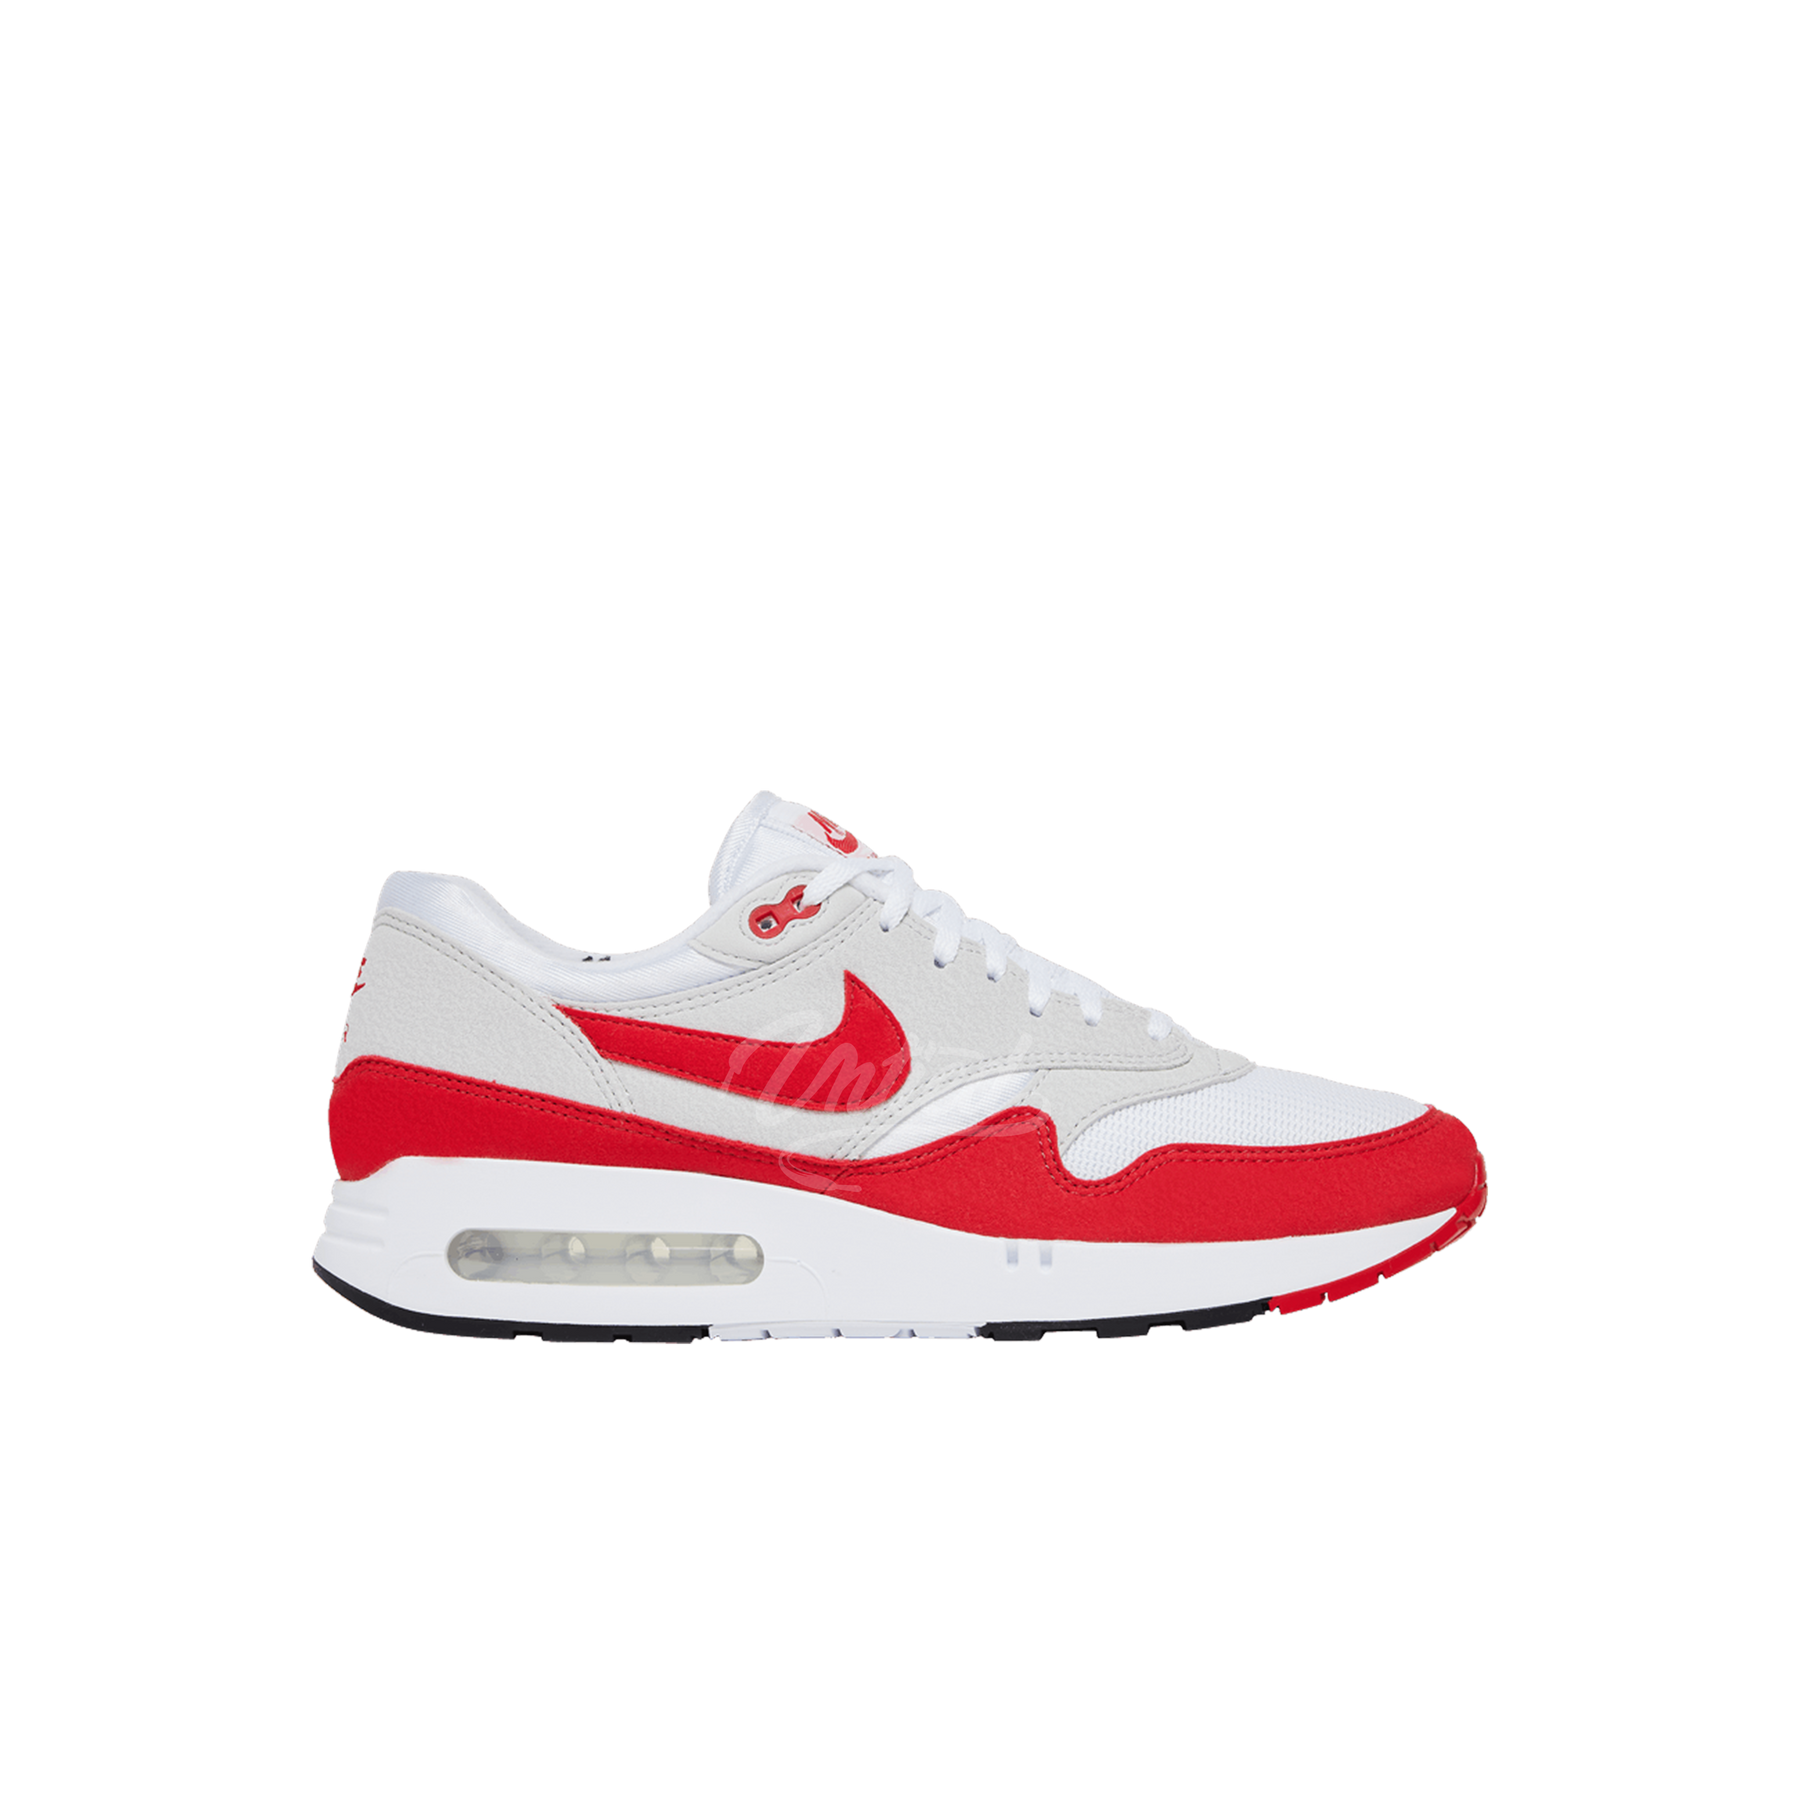 Nike Air Max 1 '86 OG "Big Bubble Sport Red"